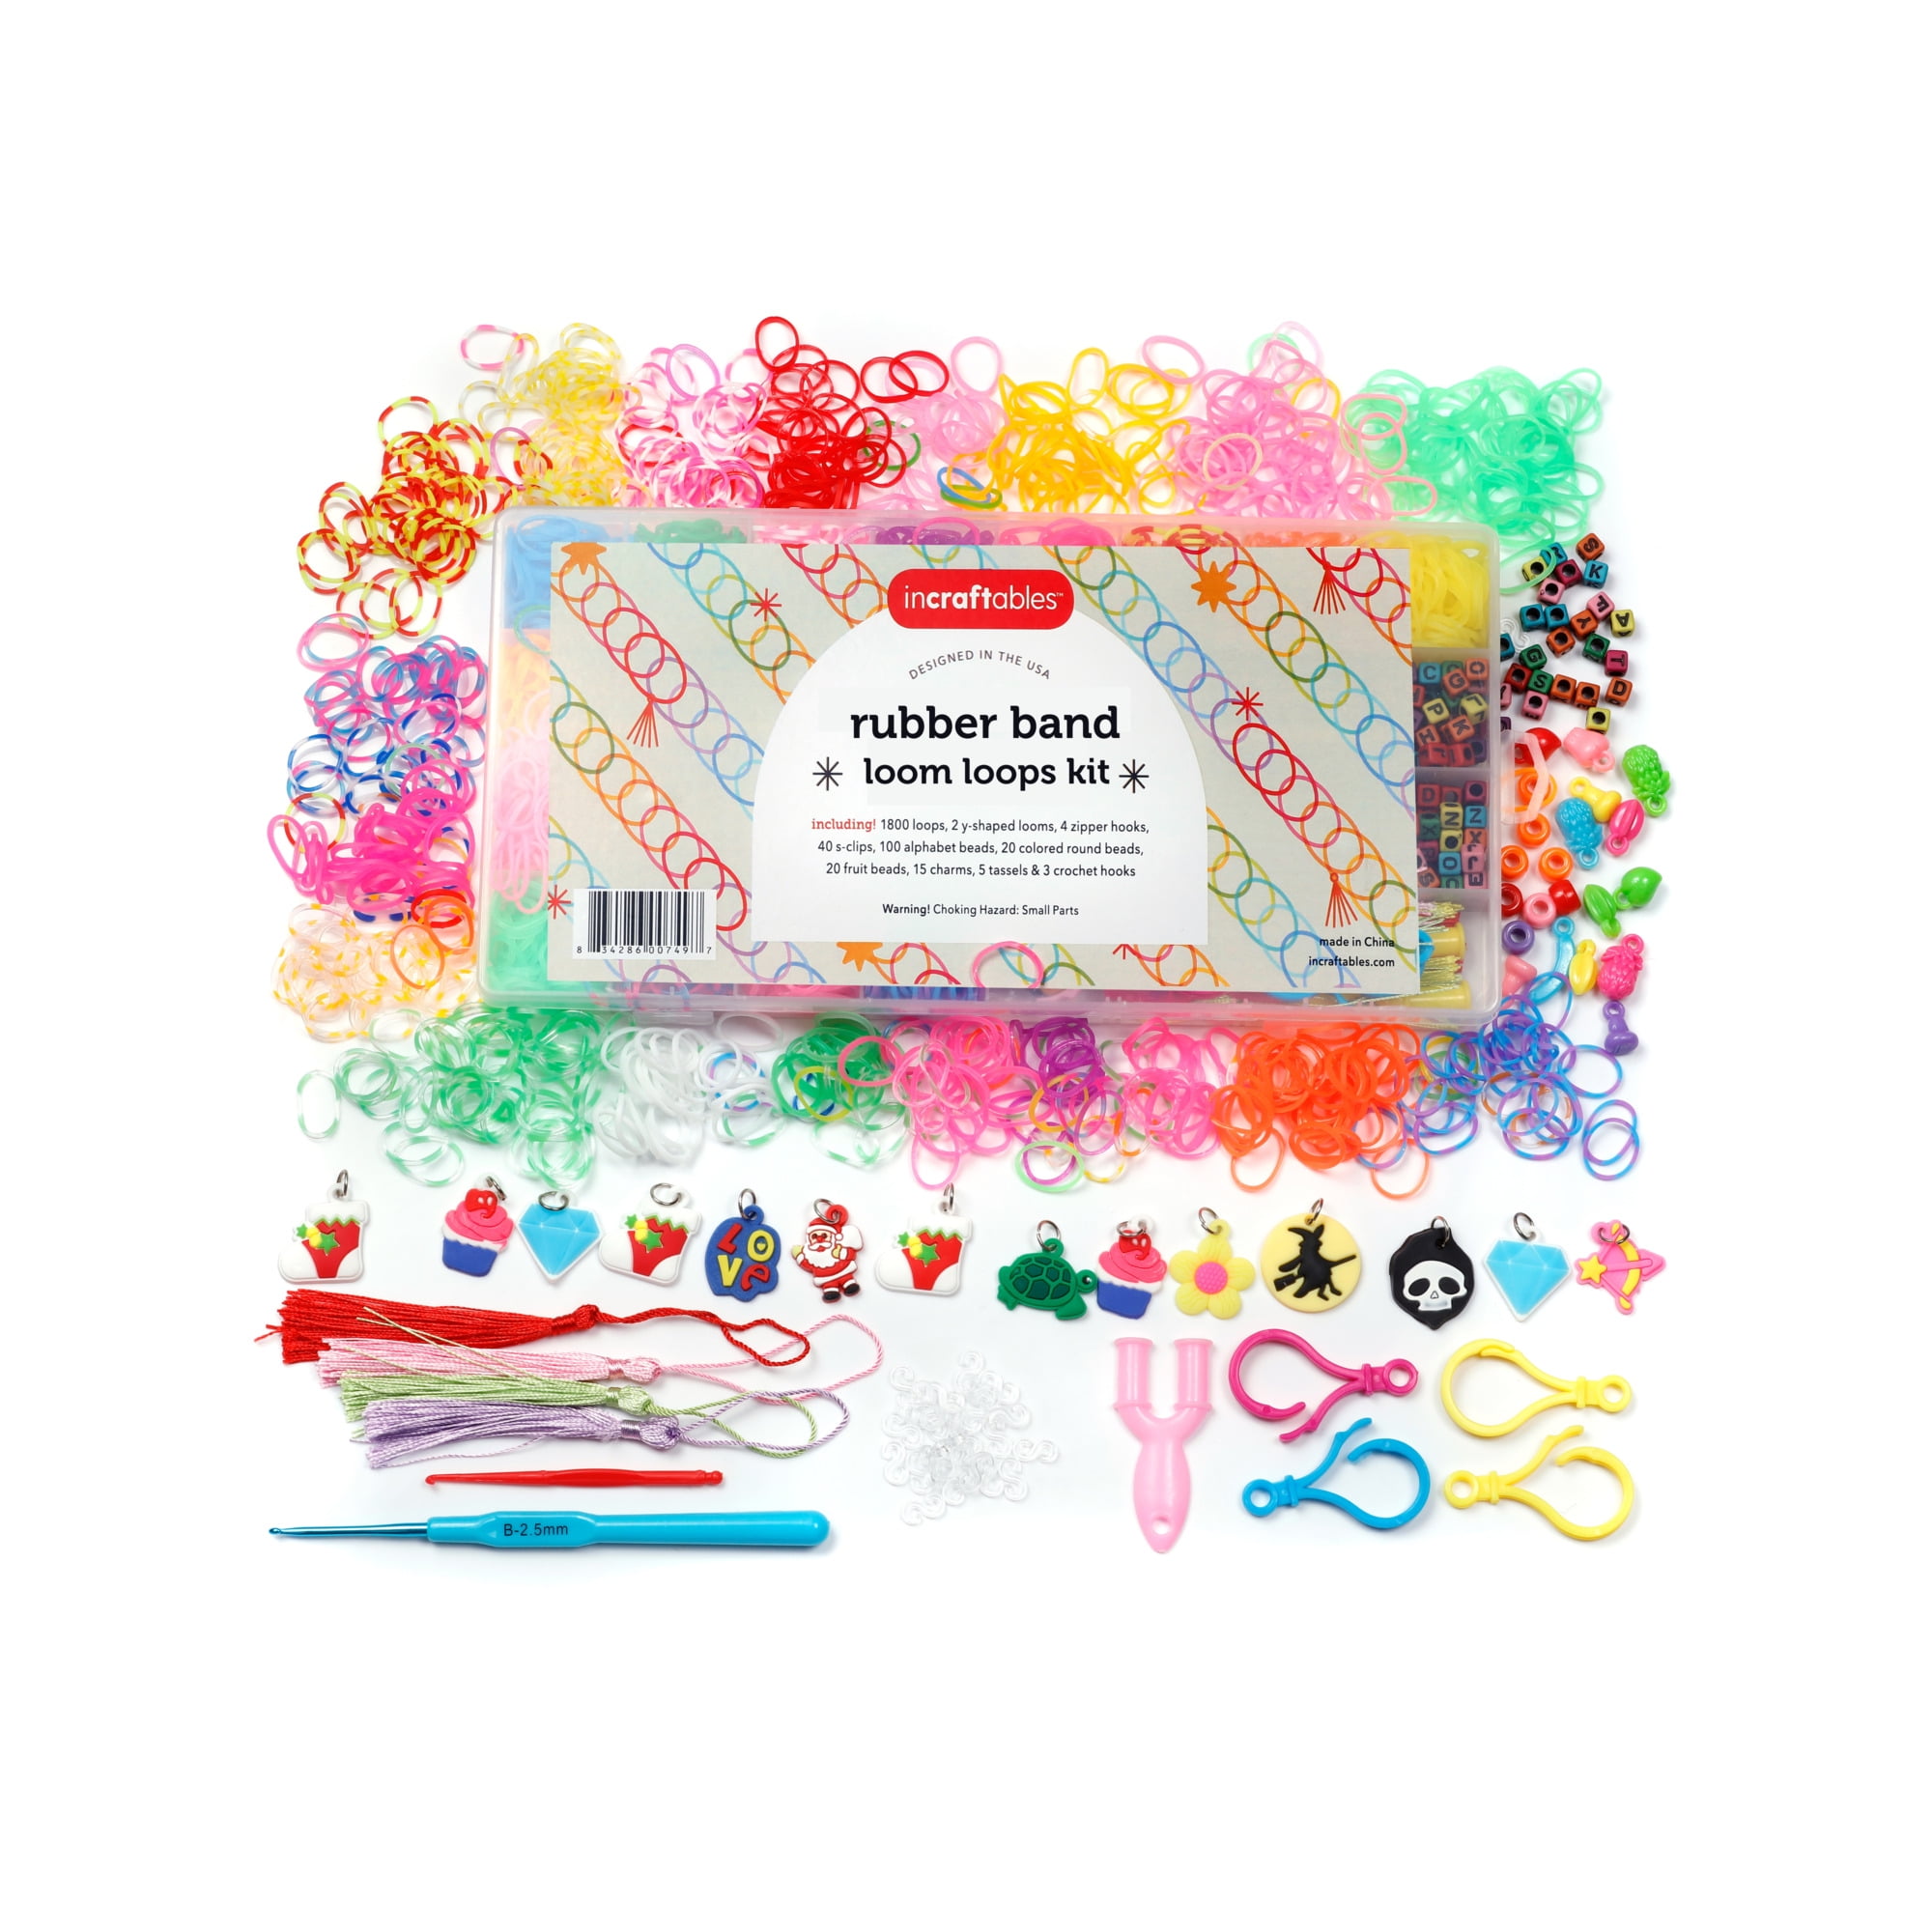 Incraftables Rubber Band Bracelet Making Kit. Multicolor Rainbow